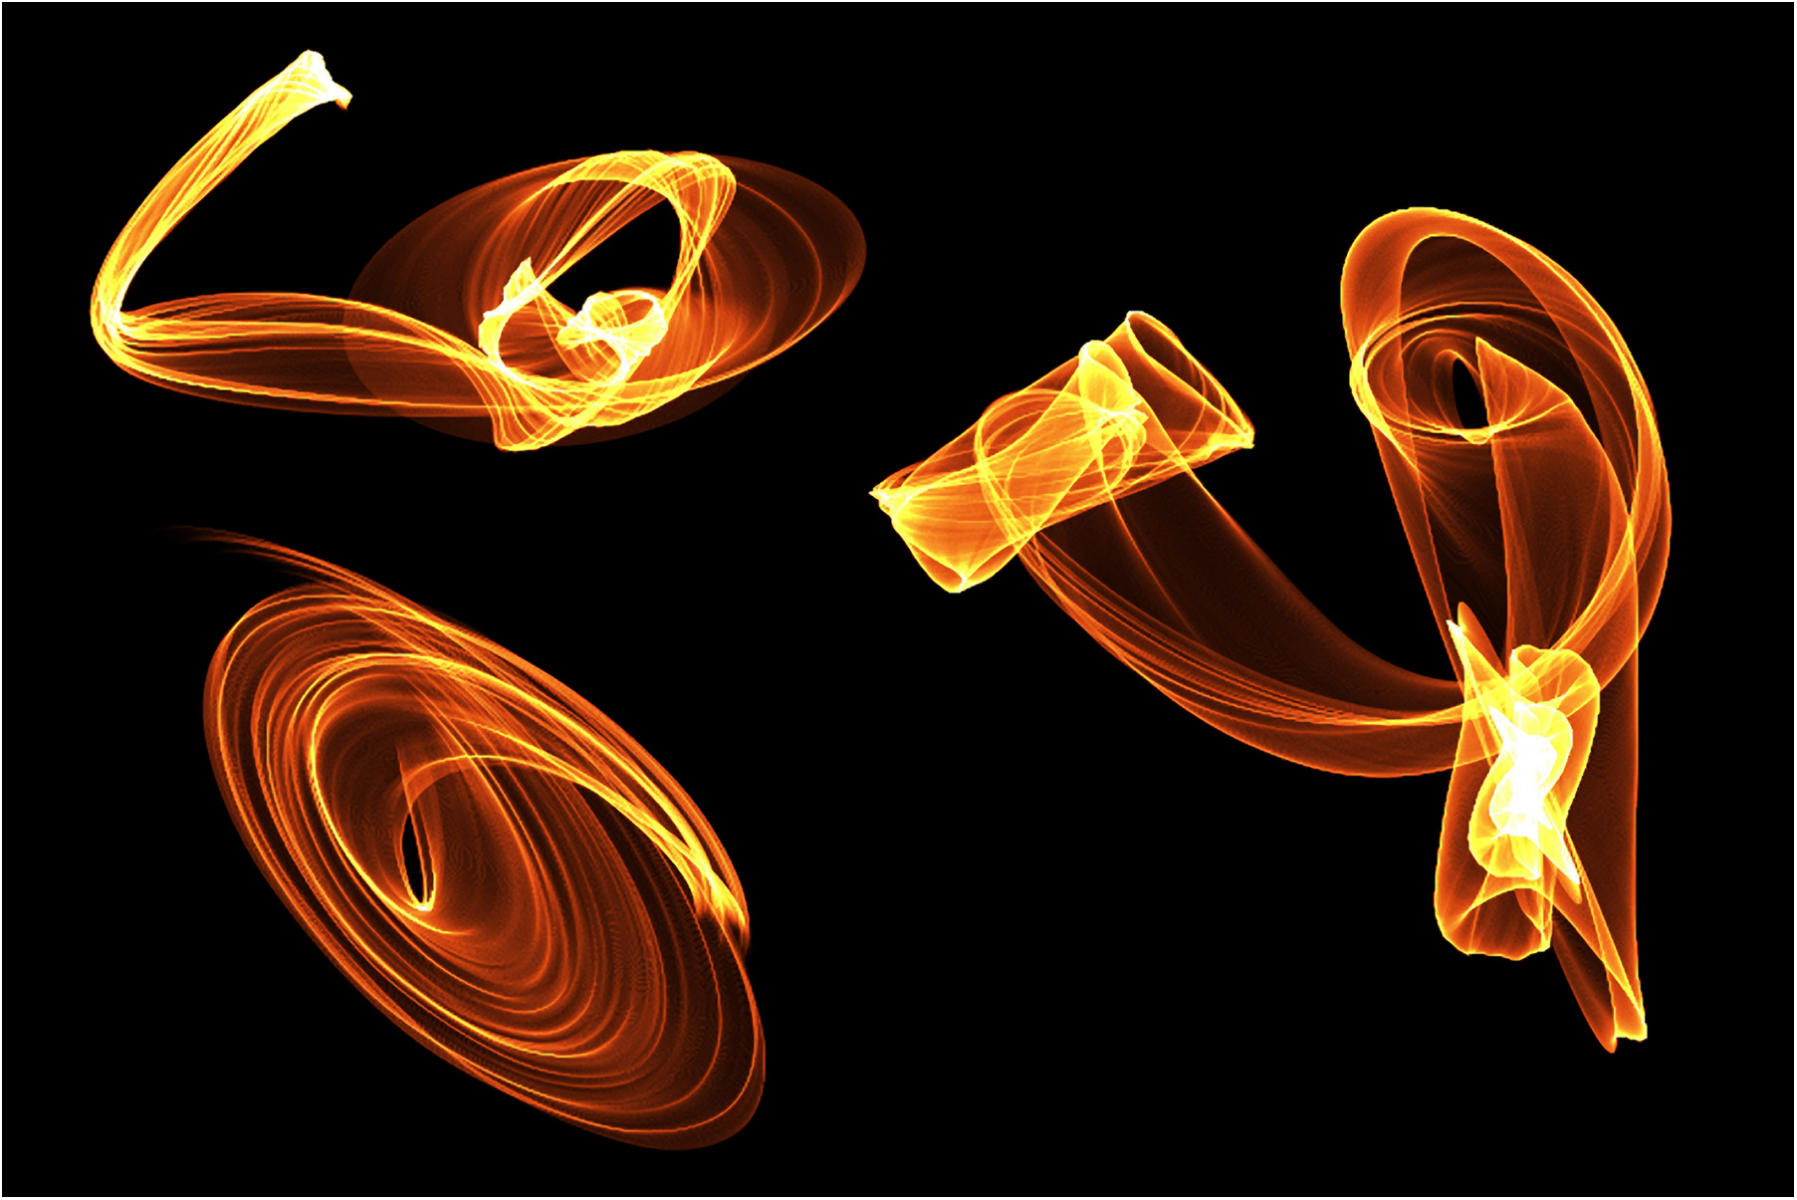 "Ribbons on Fire"